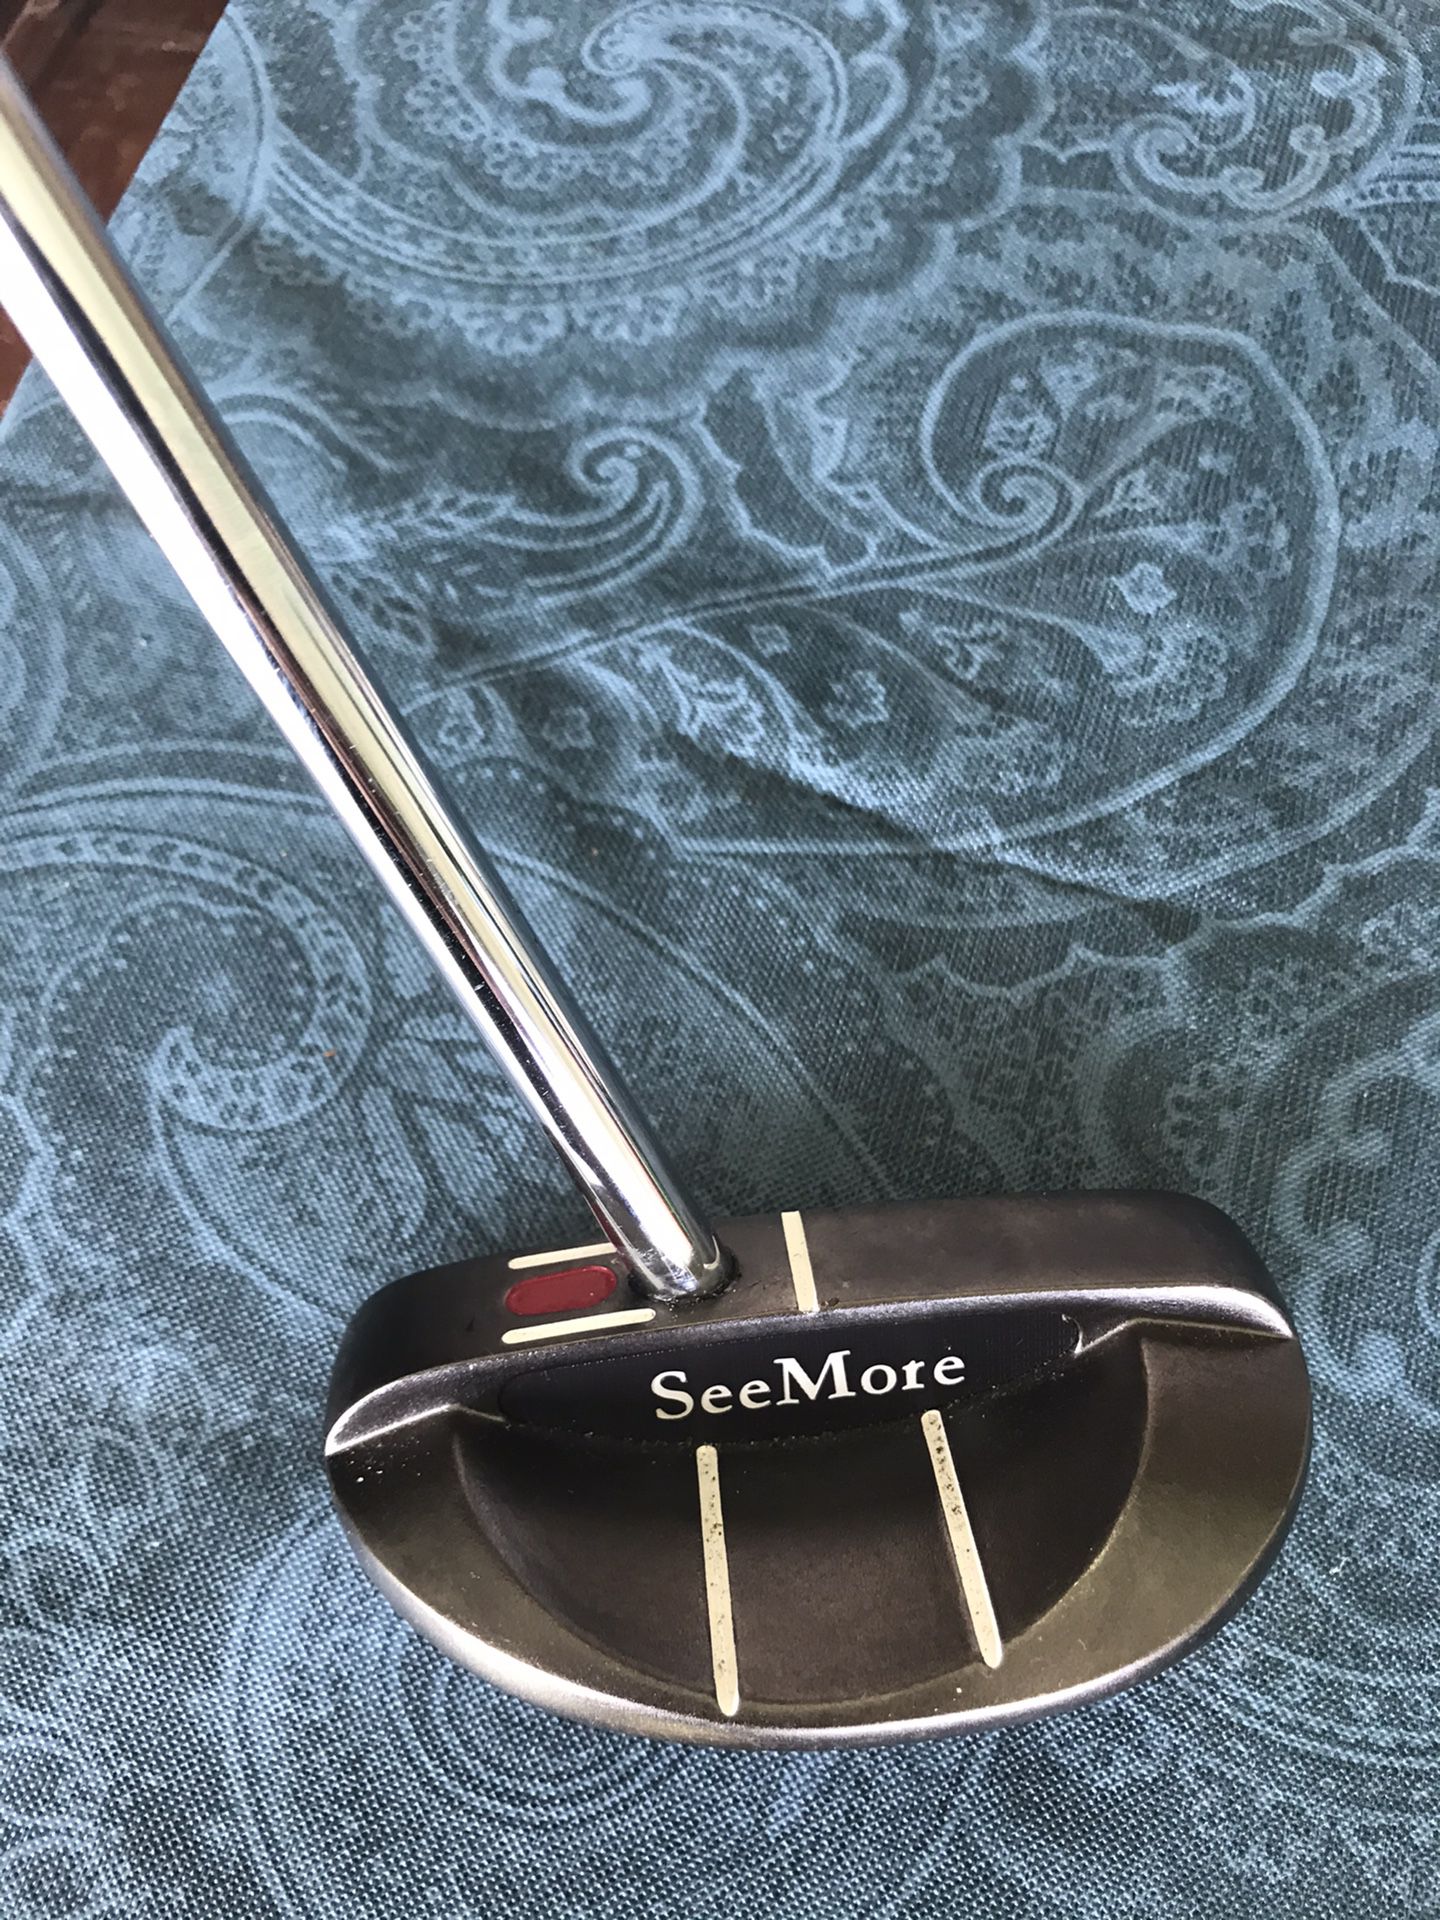 SeeMore. Putter